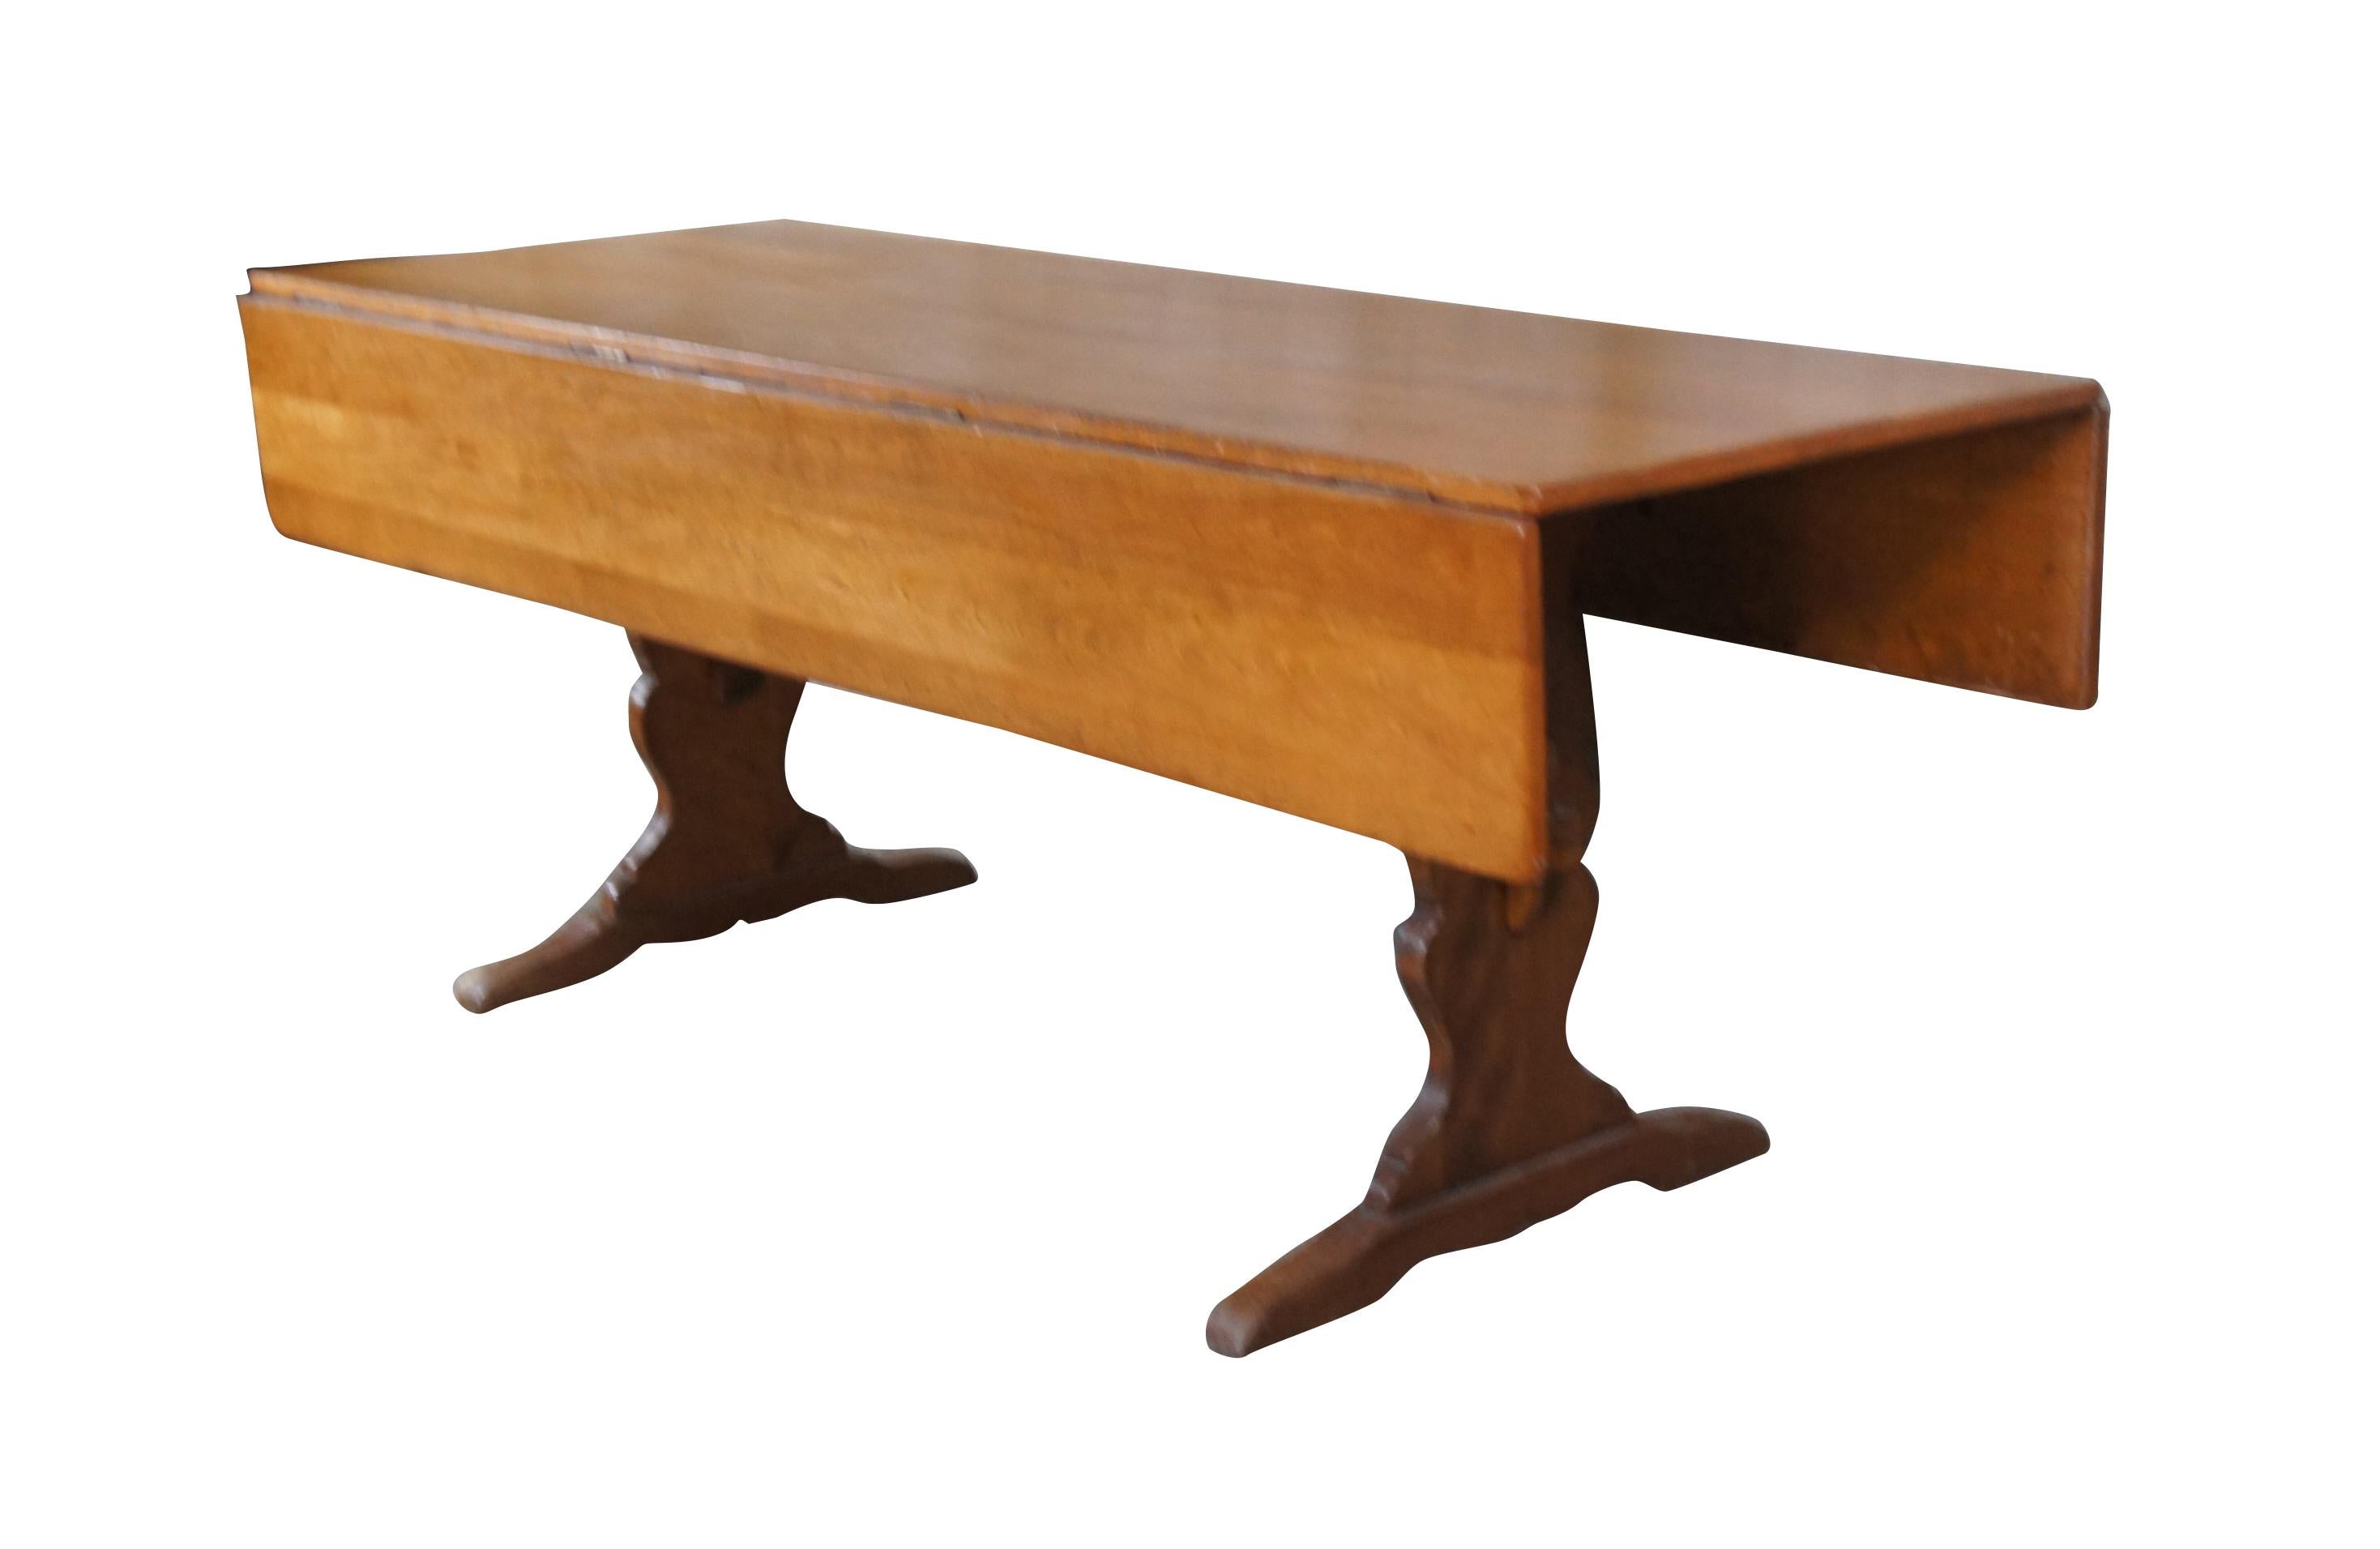 Vintage Cushman Colonial Creation drop leaf country farmhouse dining table.  Made of rock maple featuring rectangular form with two large long drop leaves over a serpentine trestle base.  A Genuine Cushman Colonial Creation made in Bennington